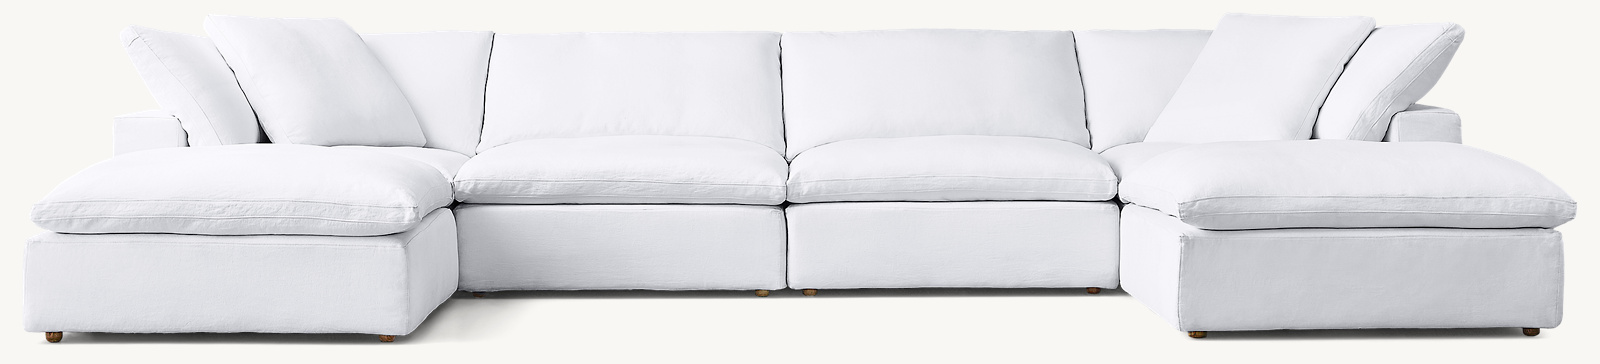 Shown in White Washed Belgian Flax Linen; preconfigured sectional consists of 2 corner chairs, 2 armless chairs and 2 end-of-sectional ottomans. Cushion configuration may vary by component.